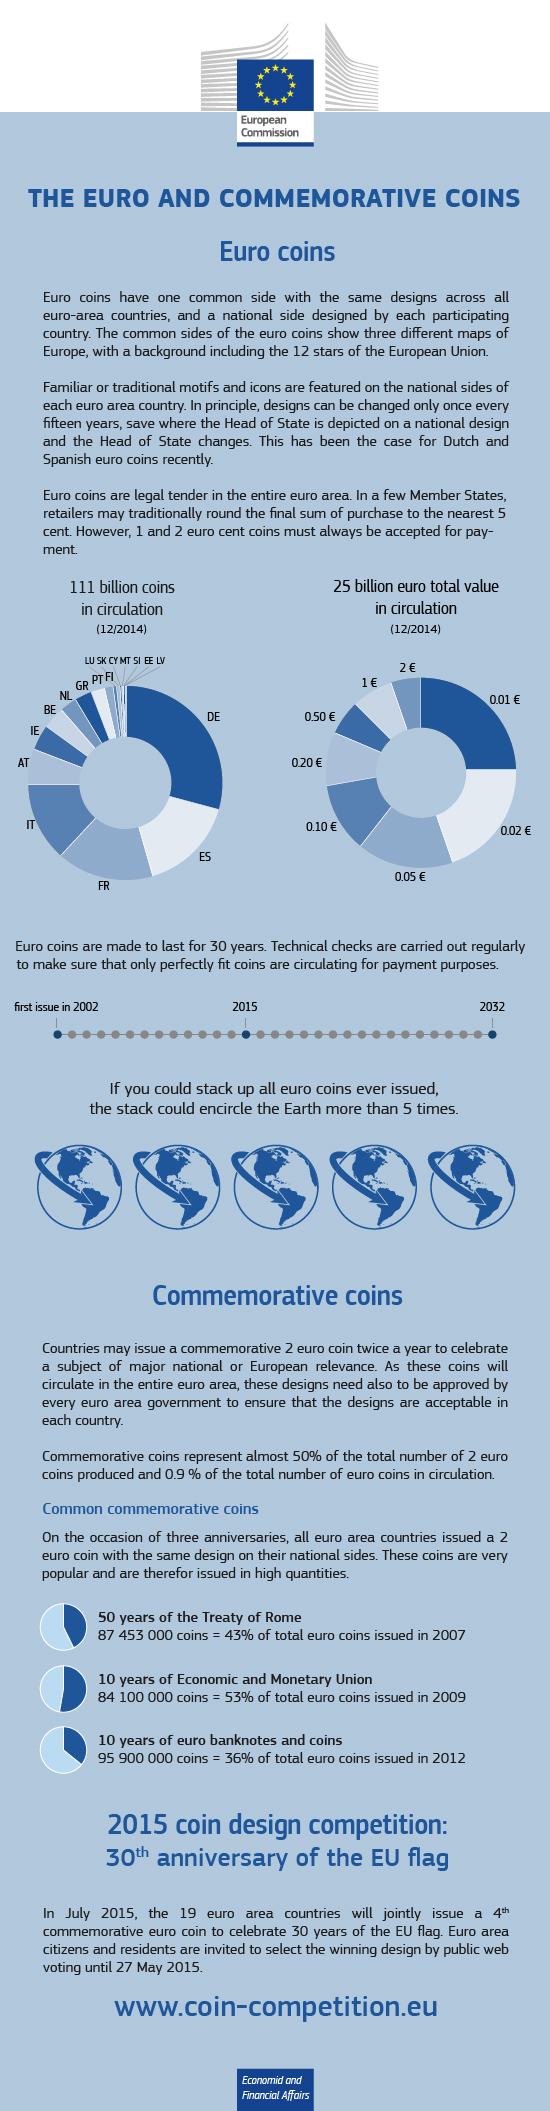 Info graphic: the euro, commemorative coins and the 2015 coin design competition